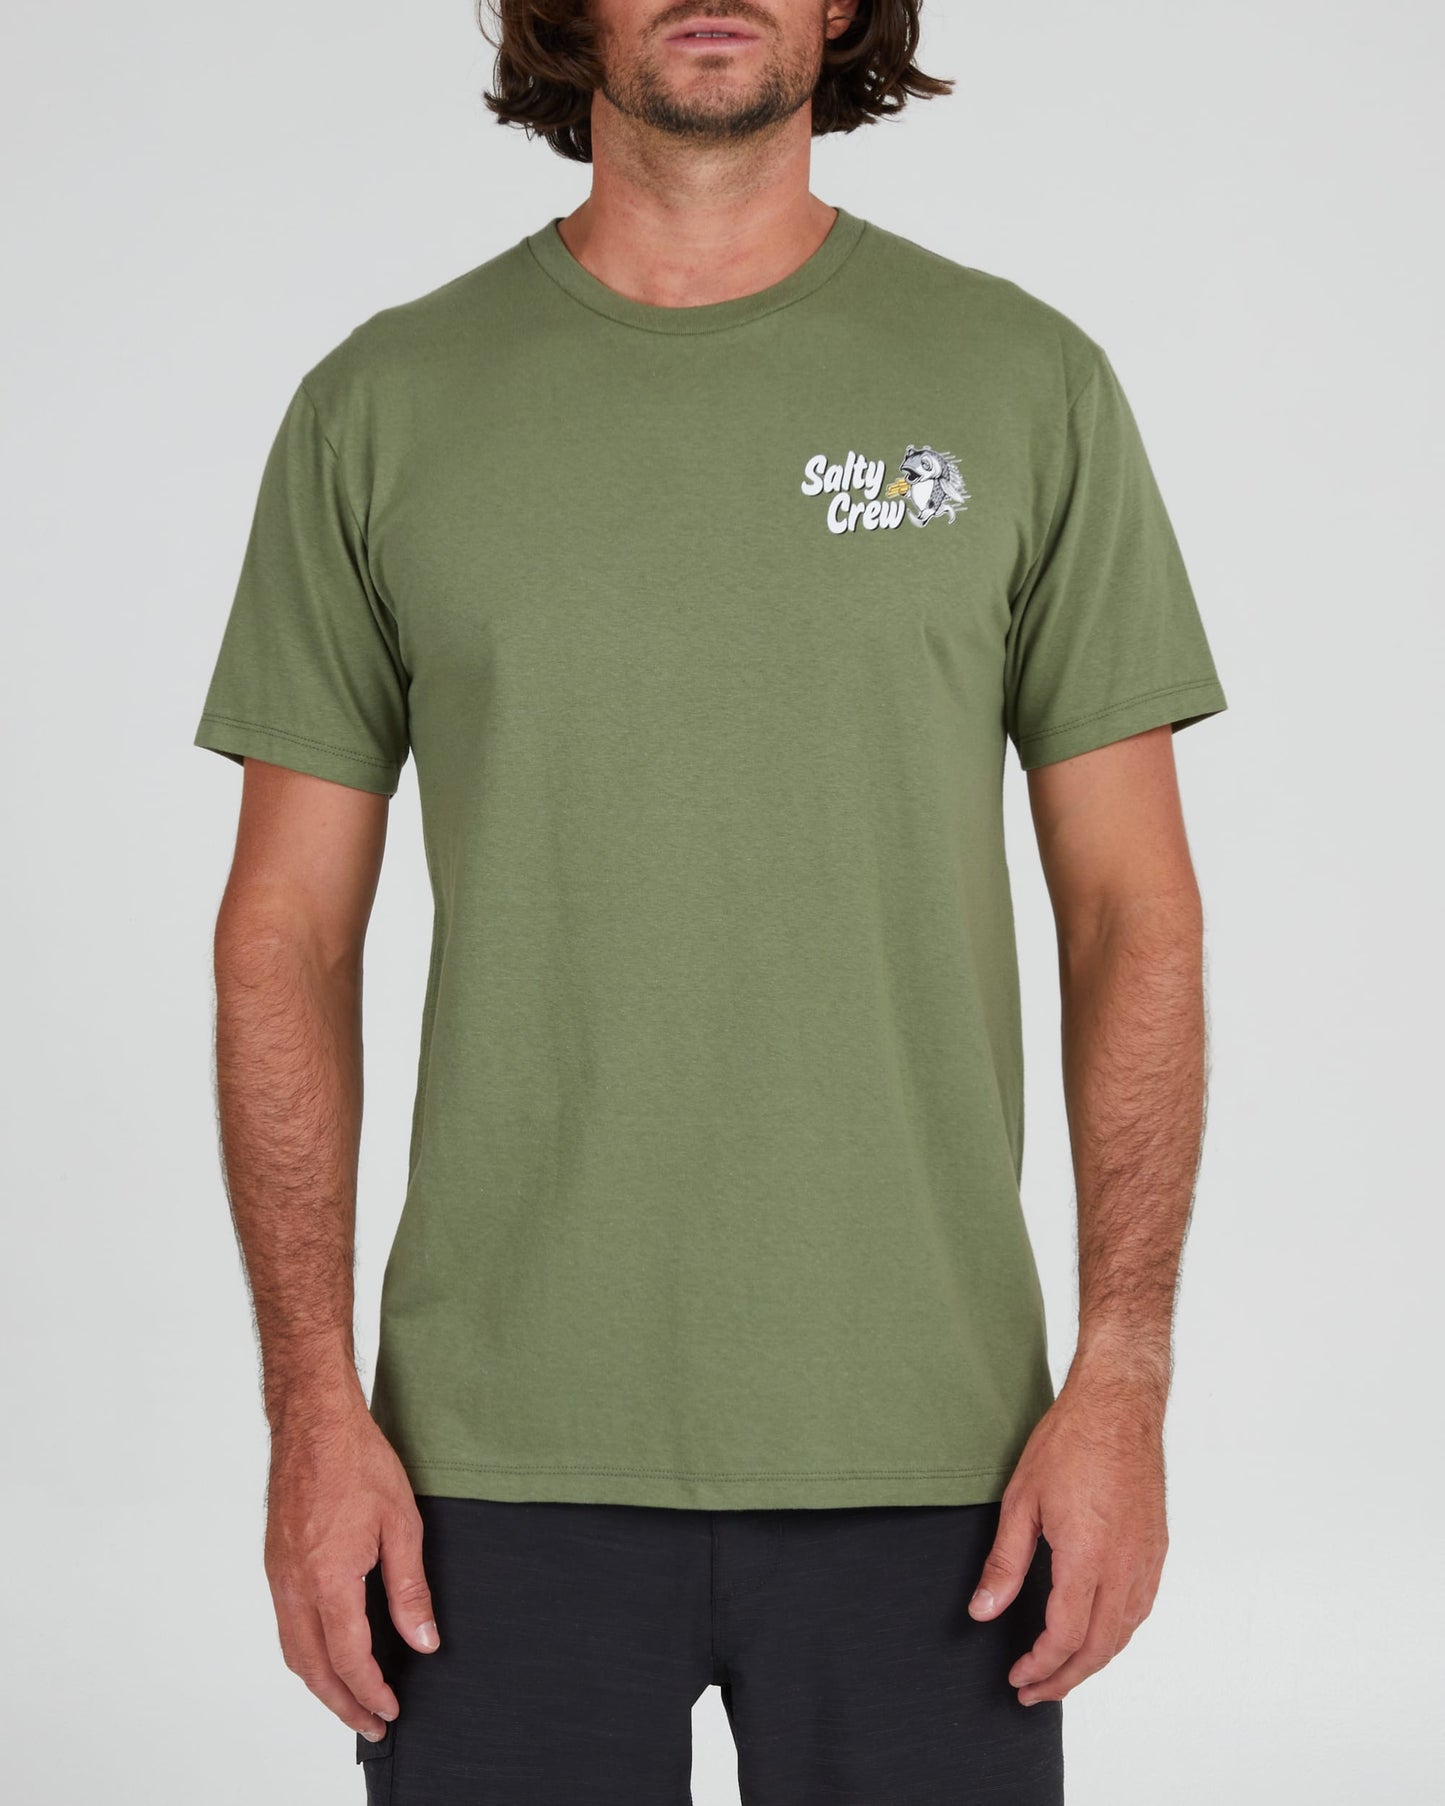 Salty crew T-SHIRTS S/S FISH AND CHIPS PREMIUM S/S TEE - Sage green in Sage green